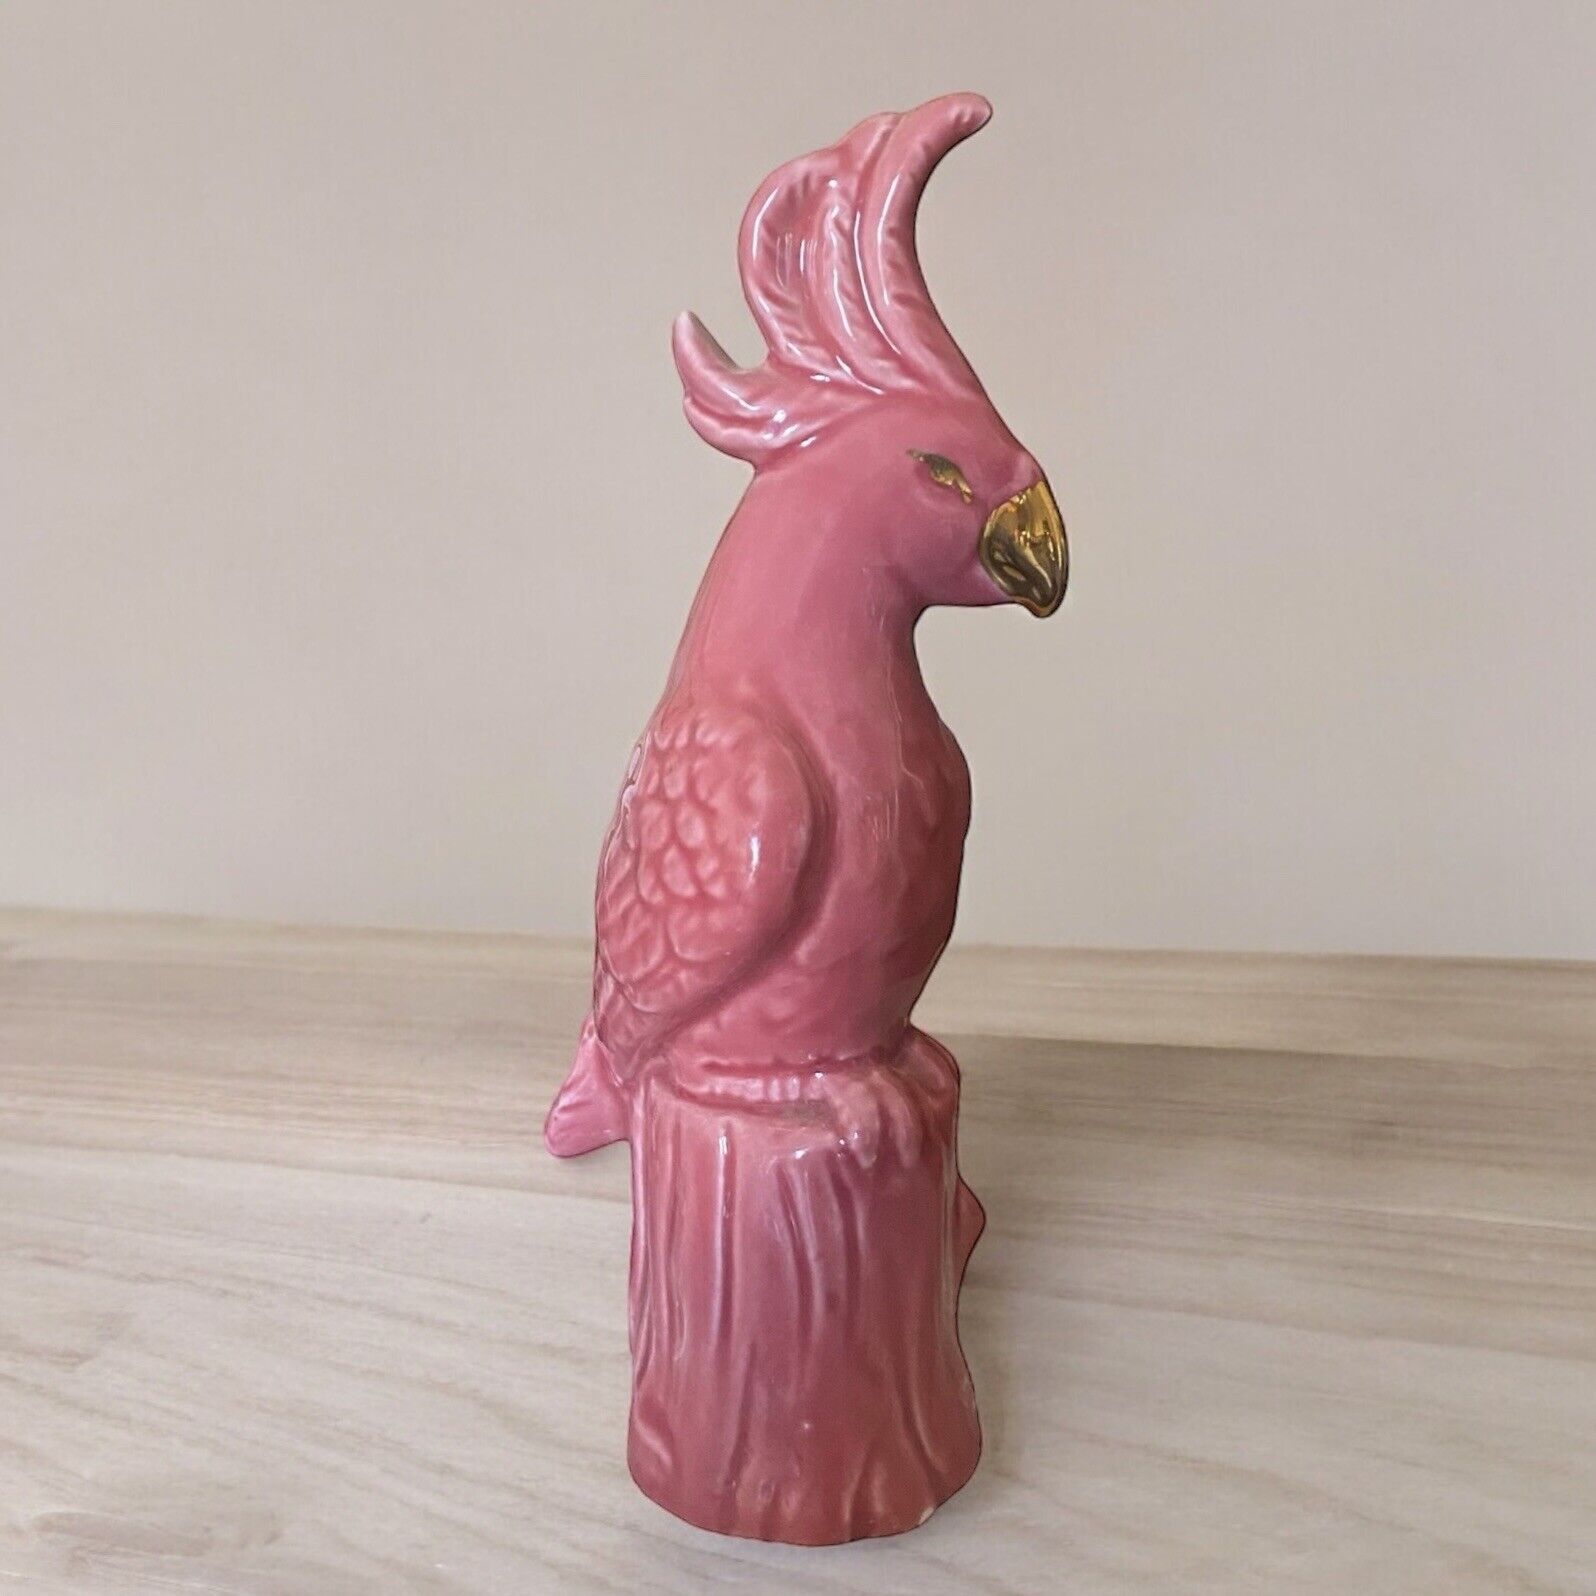 Vintage Pink Cockatoo Parrot Figurine Gold Accents Beak and Eyes 7” tall